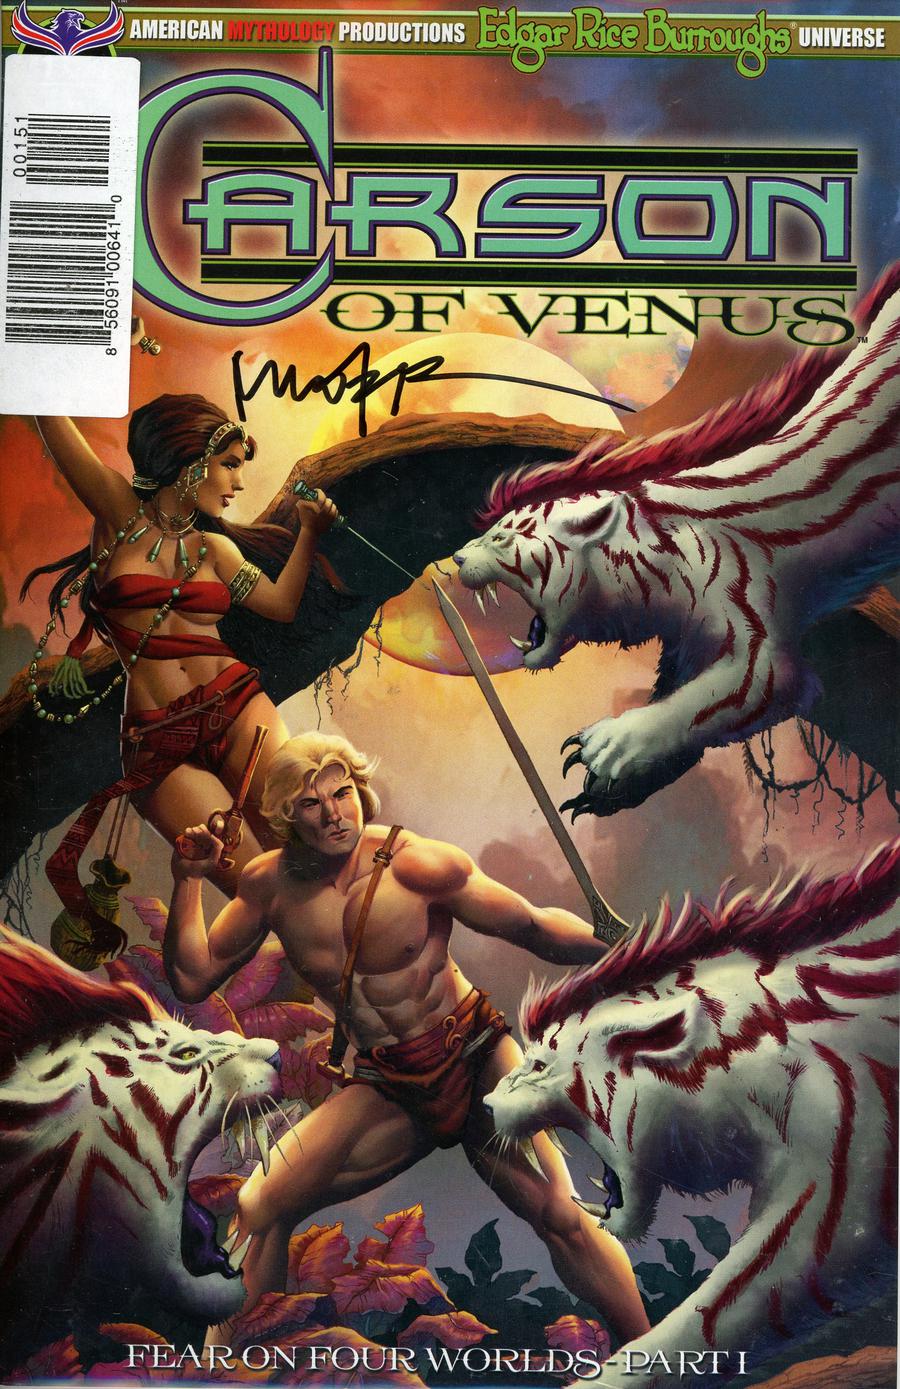 Carson Of Venus #1 Cover E Signed By Mike Wolfer (Fear On Four Worlds Part 1)